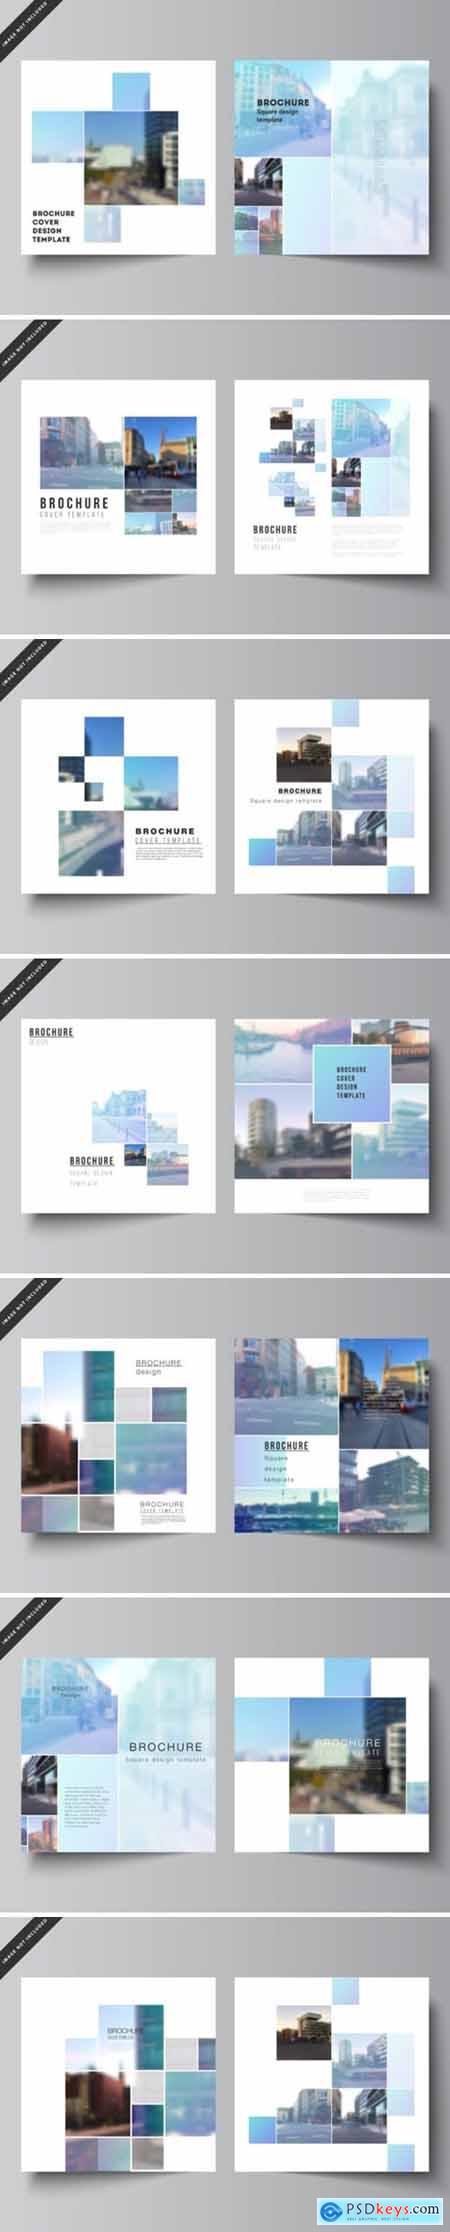 Square Format Covers Templates